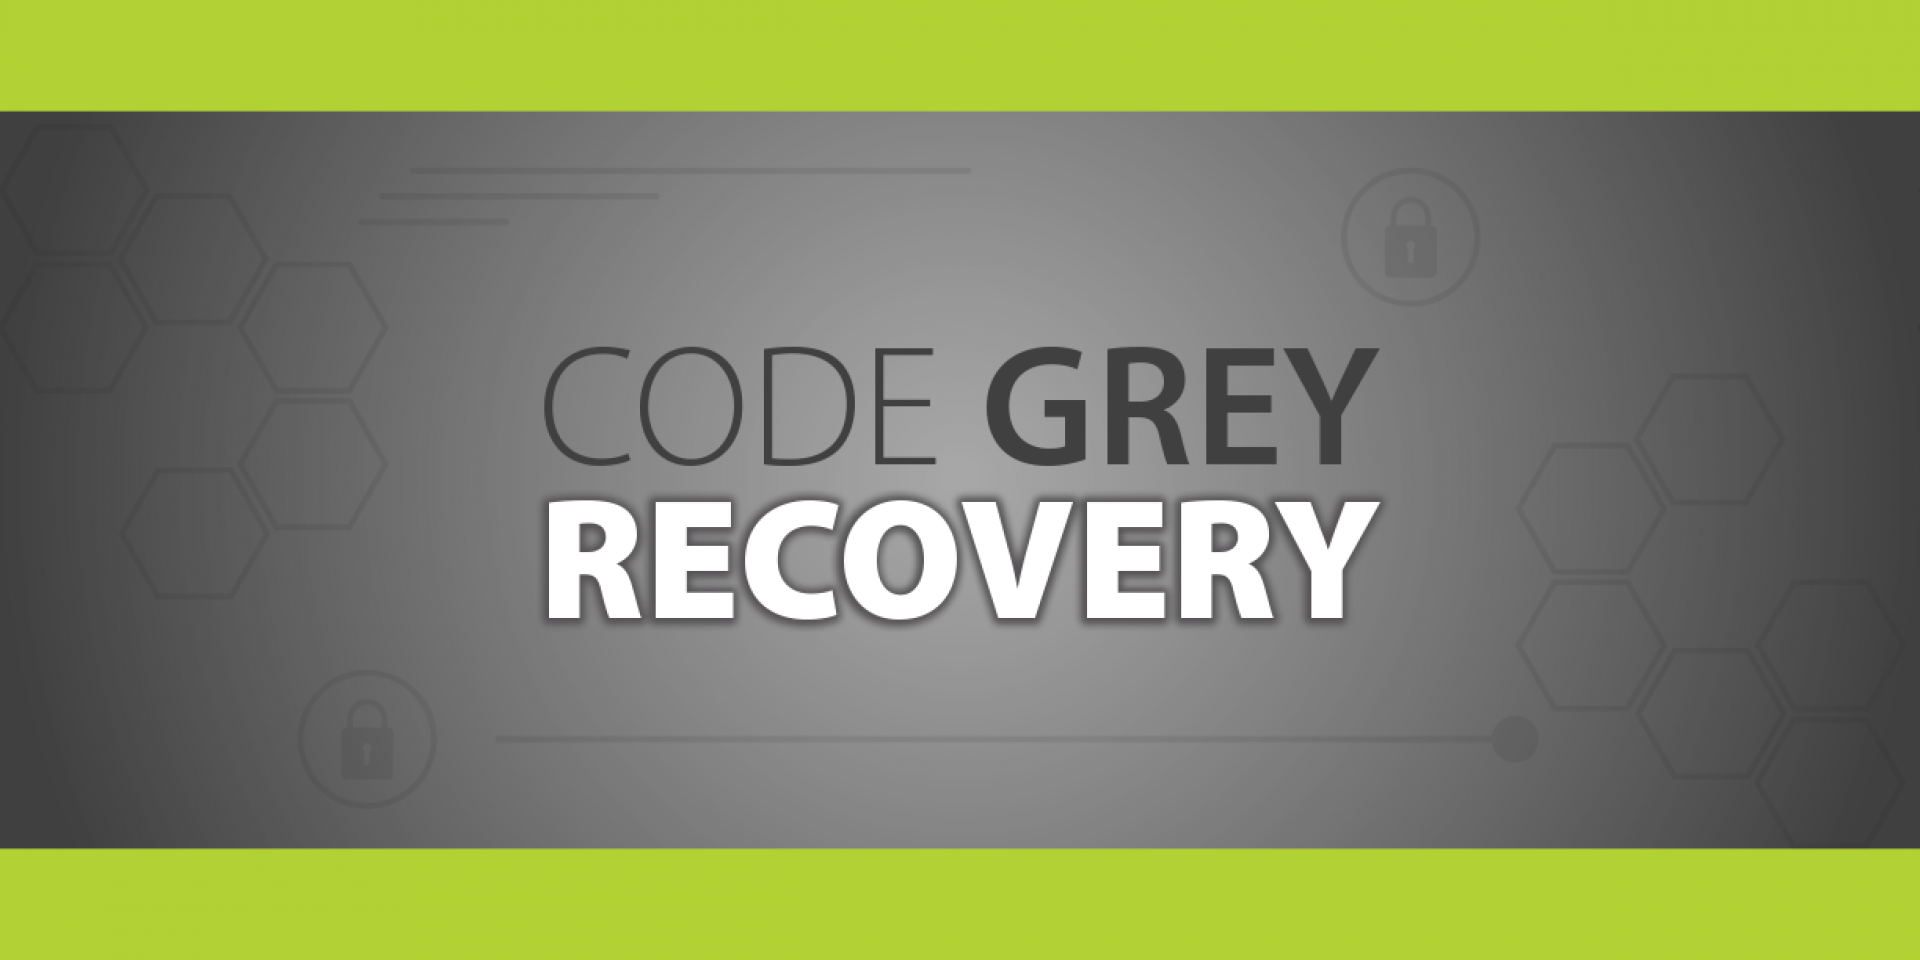 Code Grey Recovery